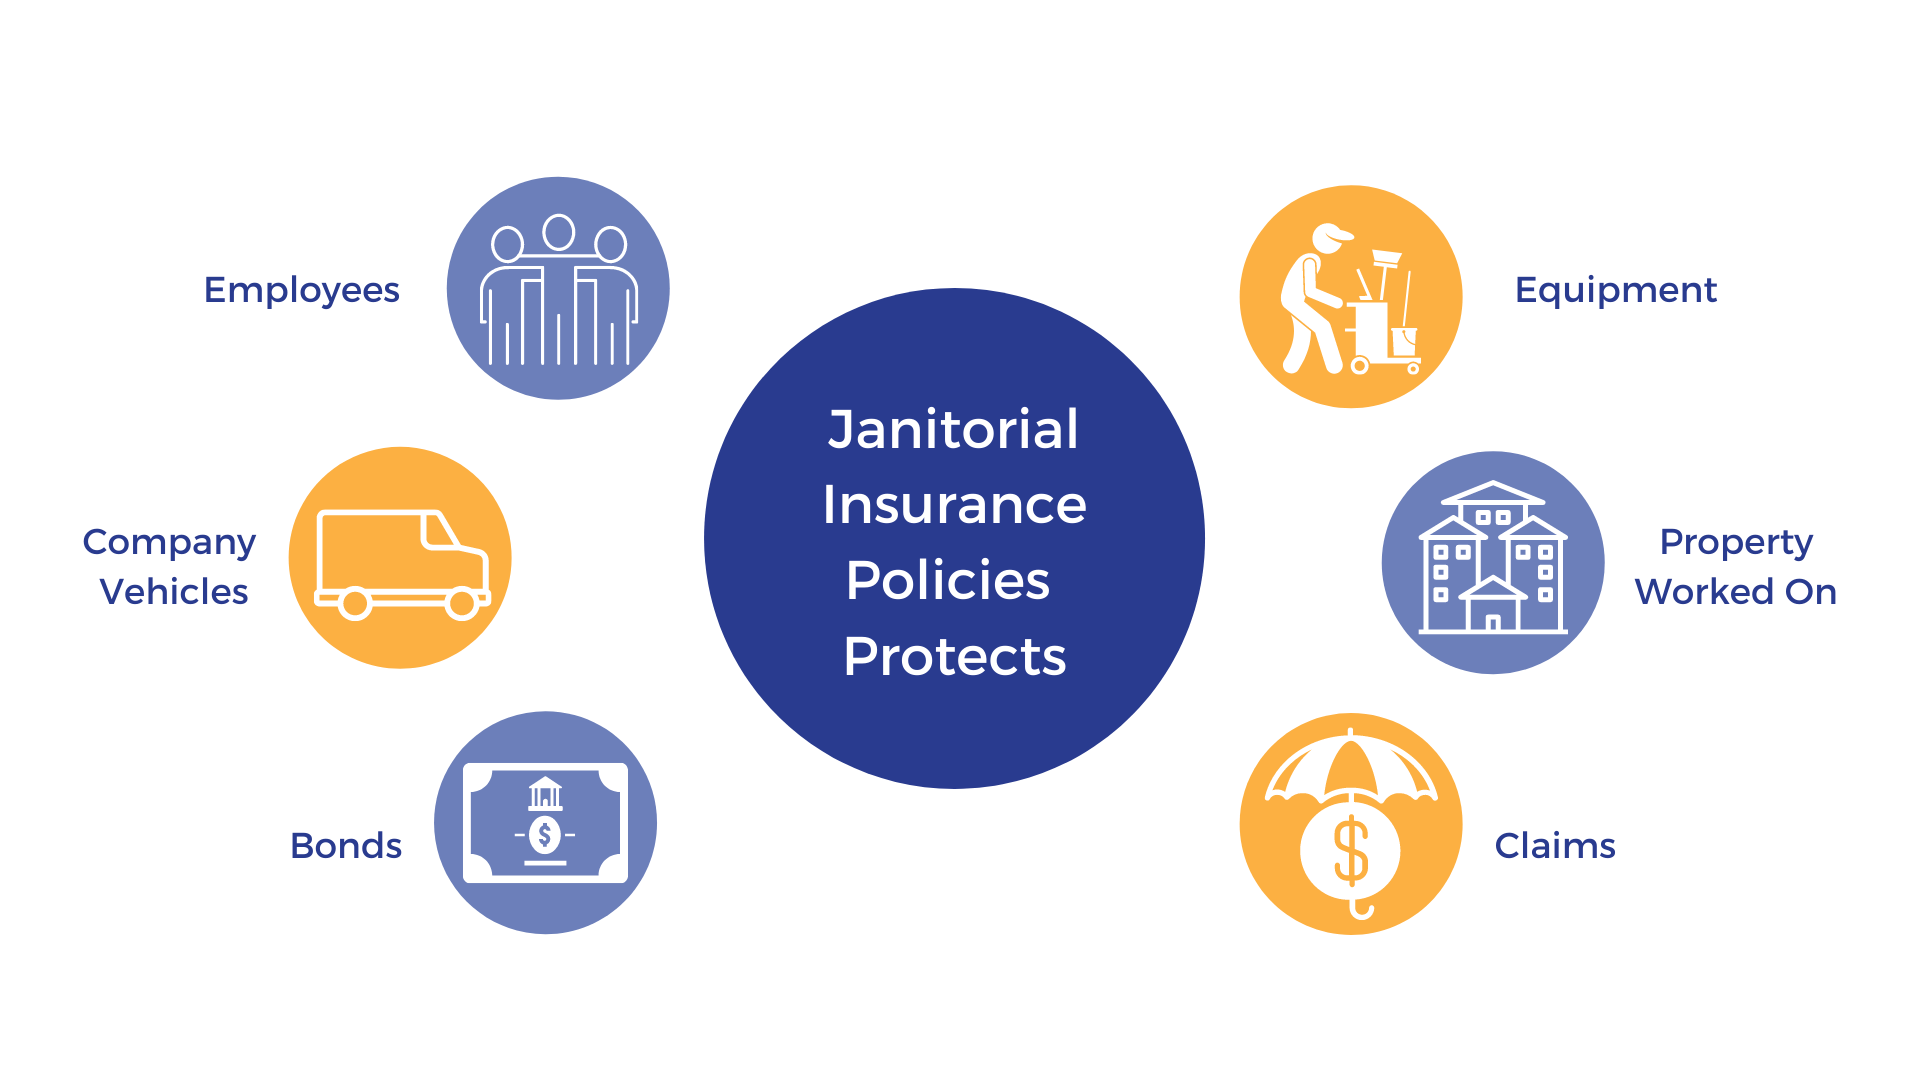 An infographic showing that janitorial insurance programs protect employees, company vehicles, bonds, equipment, property worked on, and claims